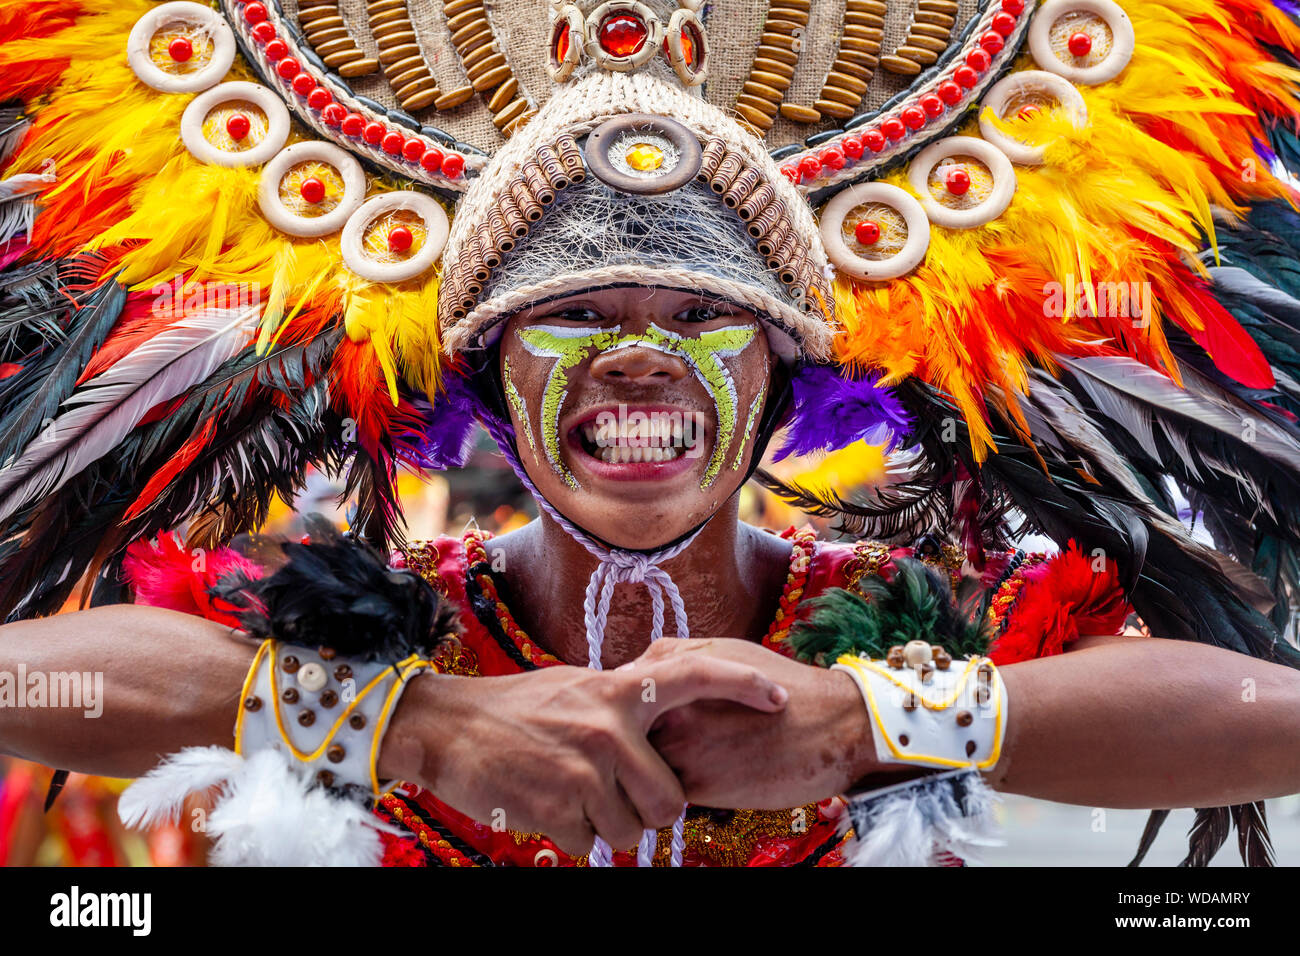 Tribal Dancing, Dinagyang Festival, Iloilo City, Panay Island, The Philippines Stock Photo